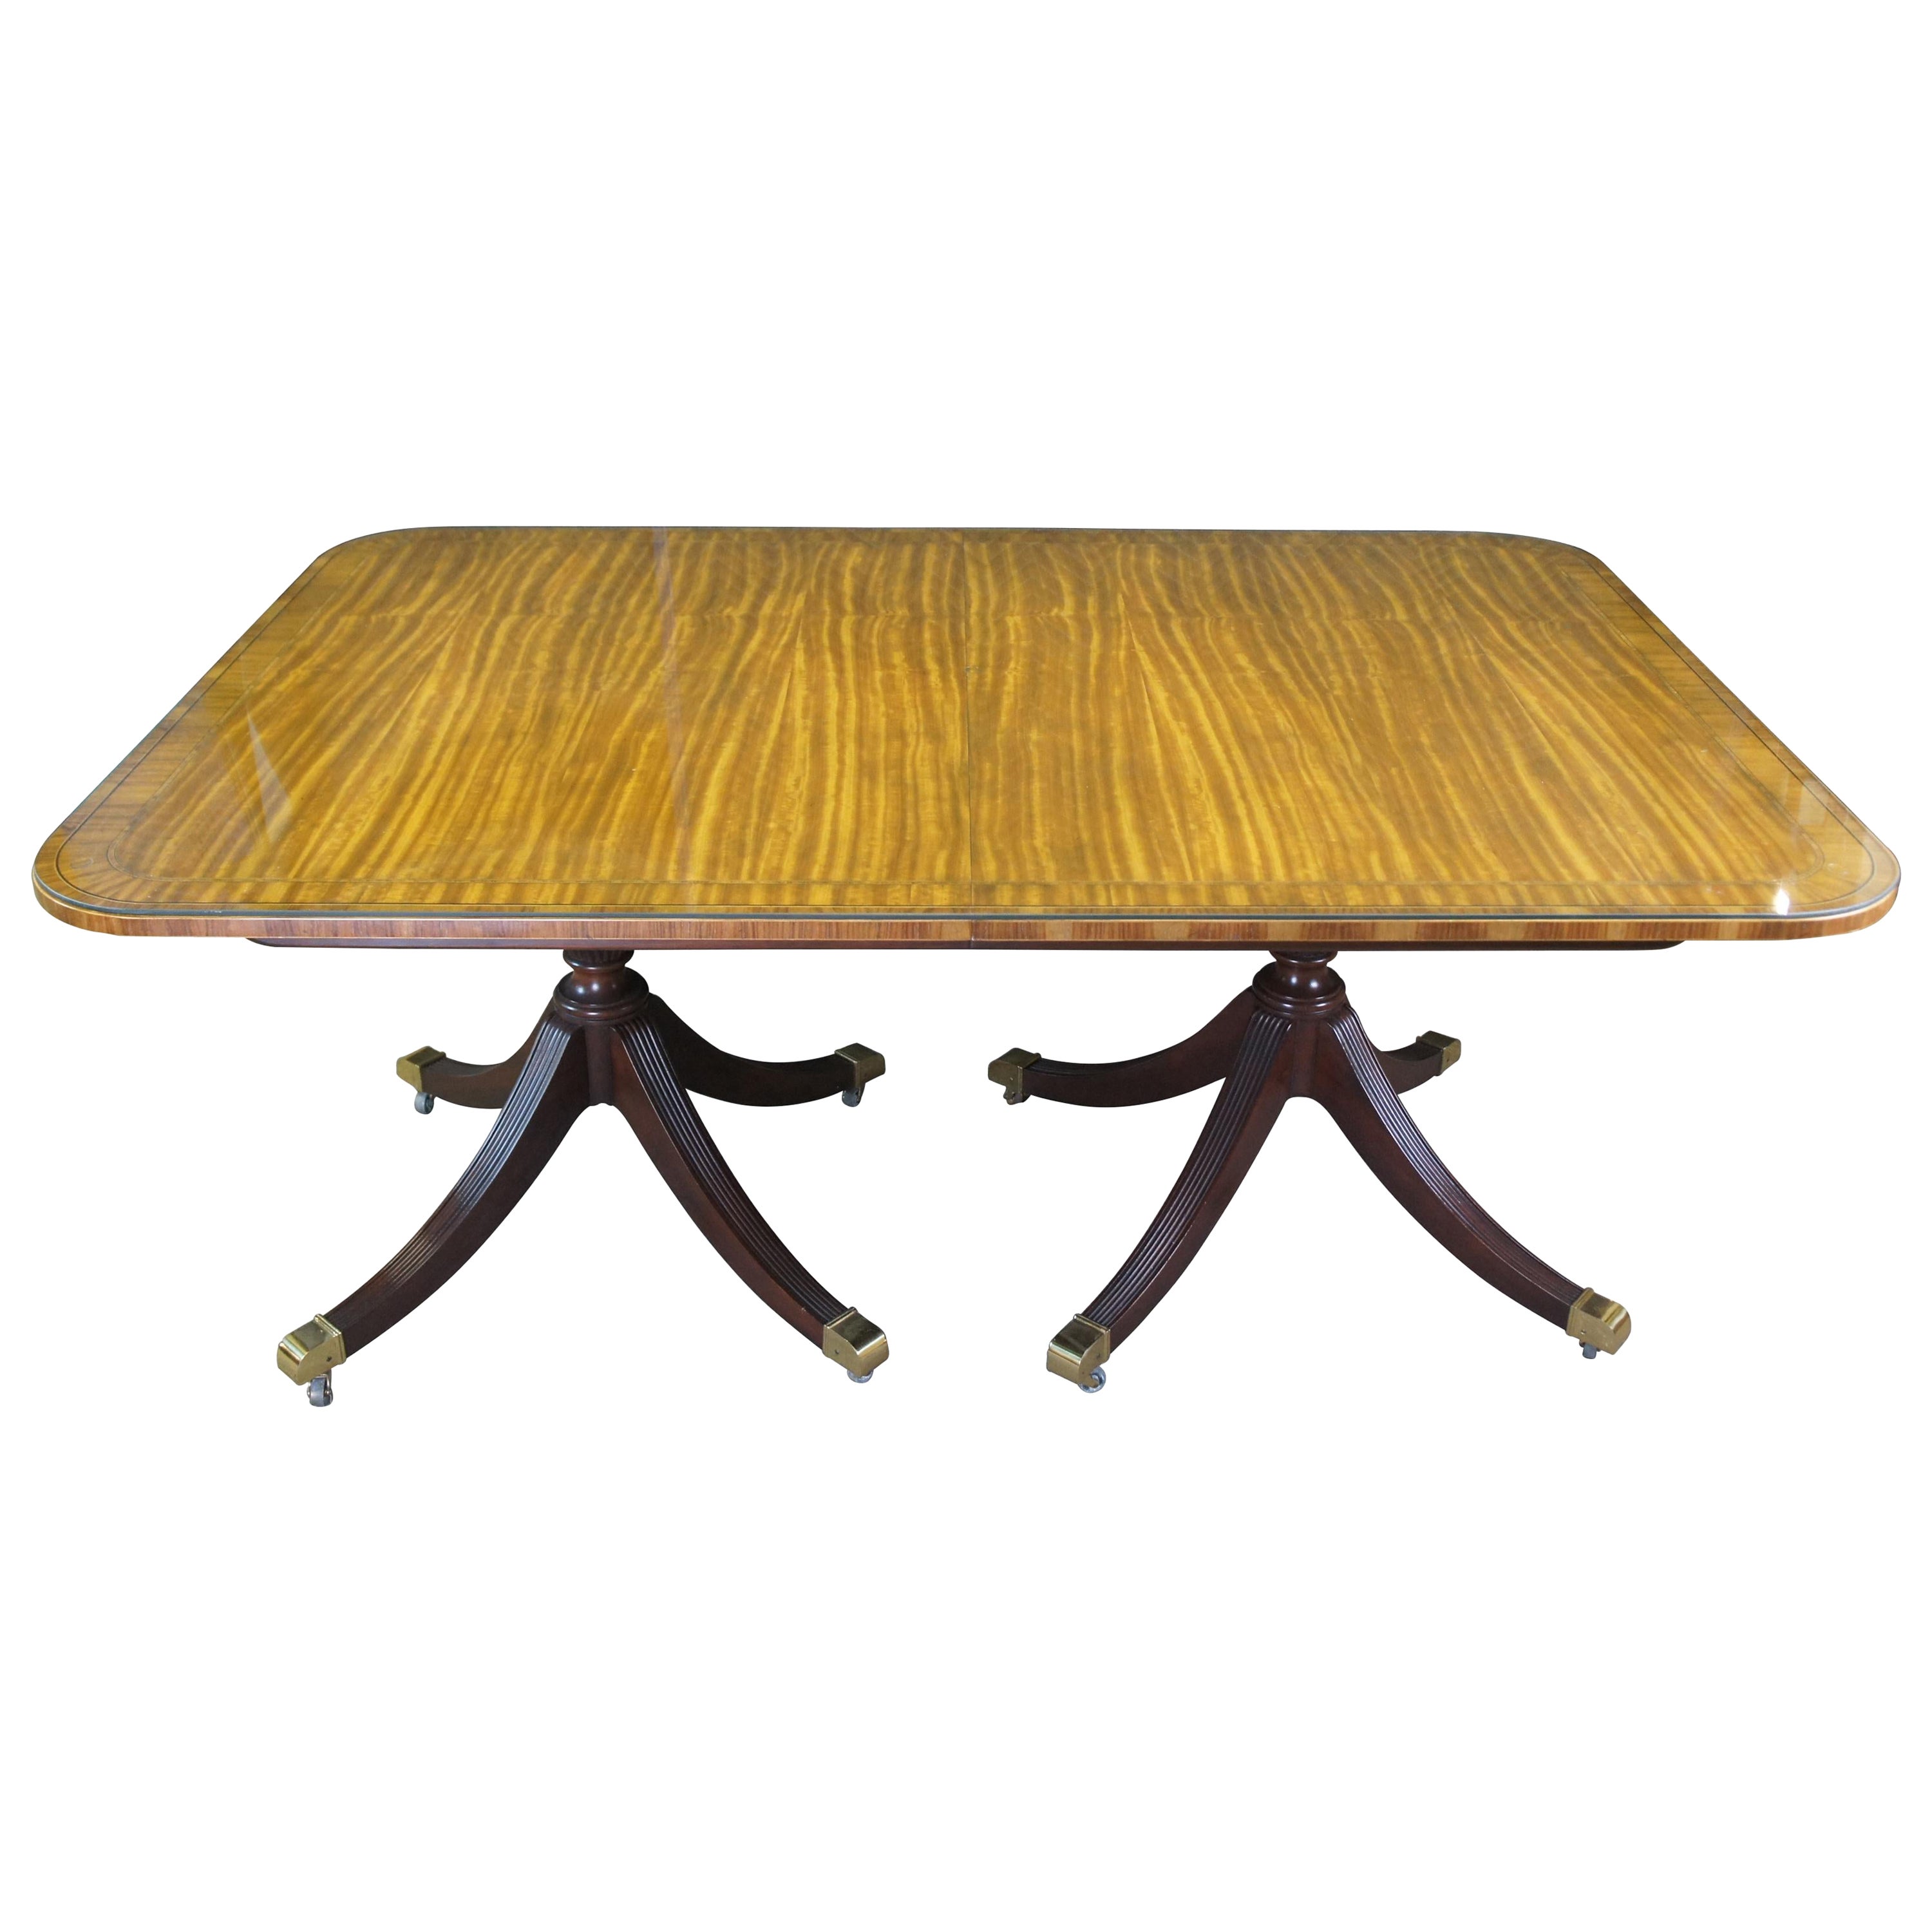 Baker Furniture Satinwood & Mahogany Duncan Phyfe Glass Top Dining Table 122" For Sale